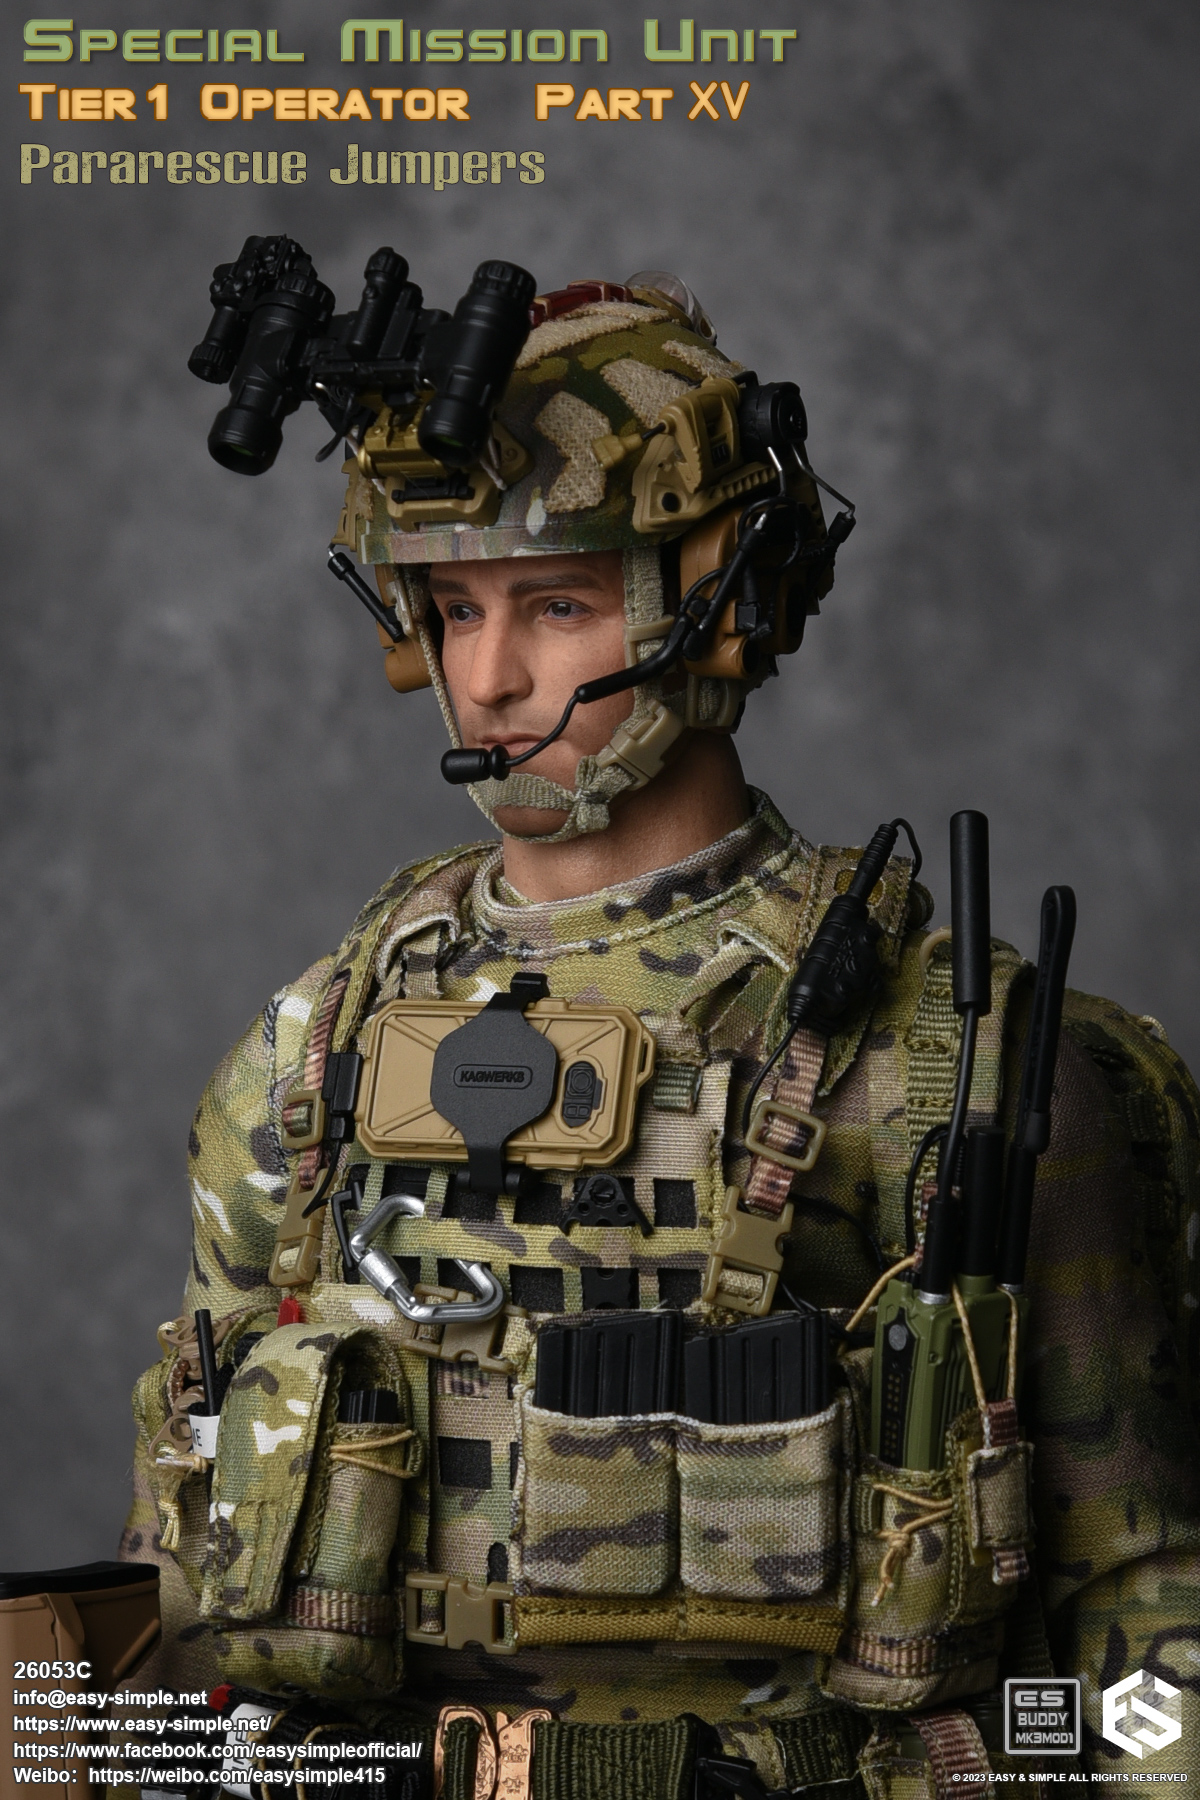 Easy&Simple C SMU Tier1 Operator Part XV Pararescue Jumpers